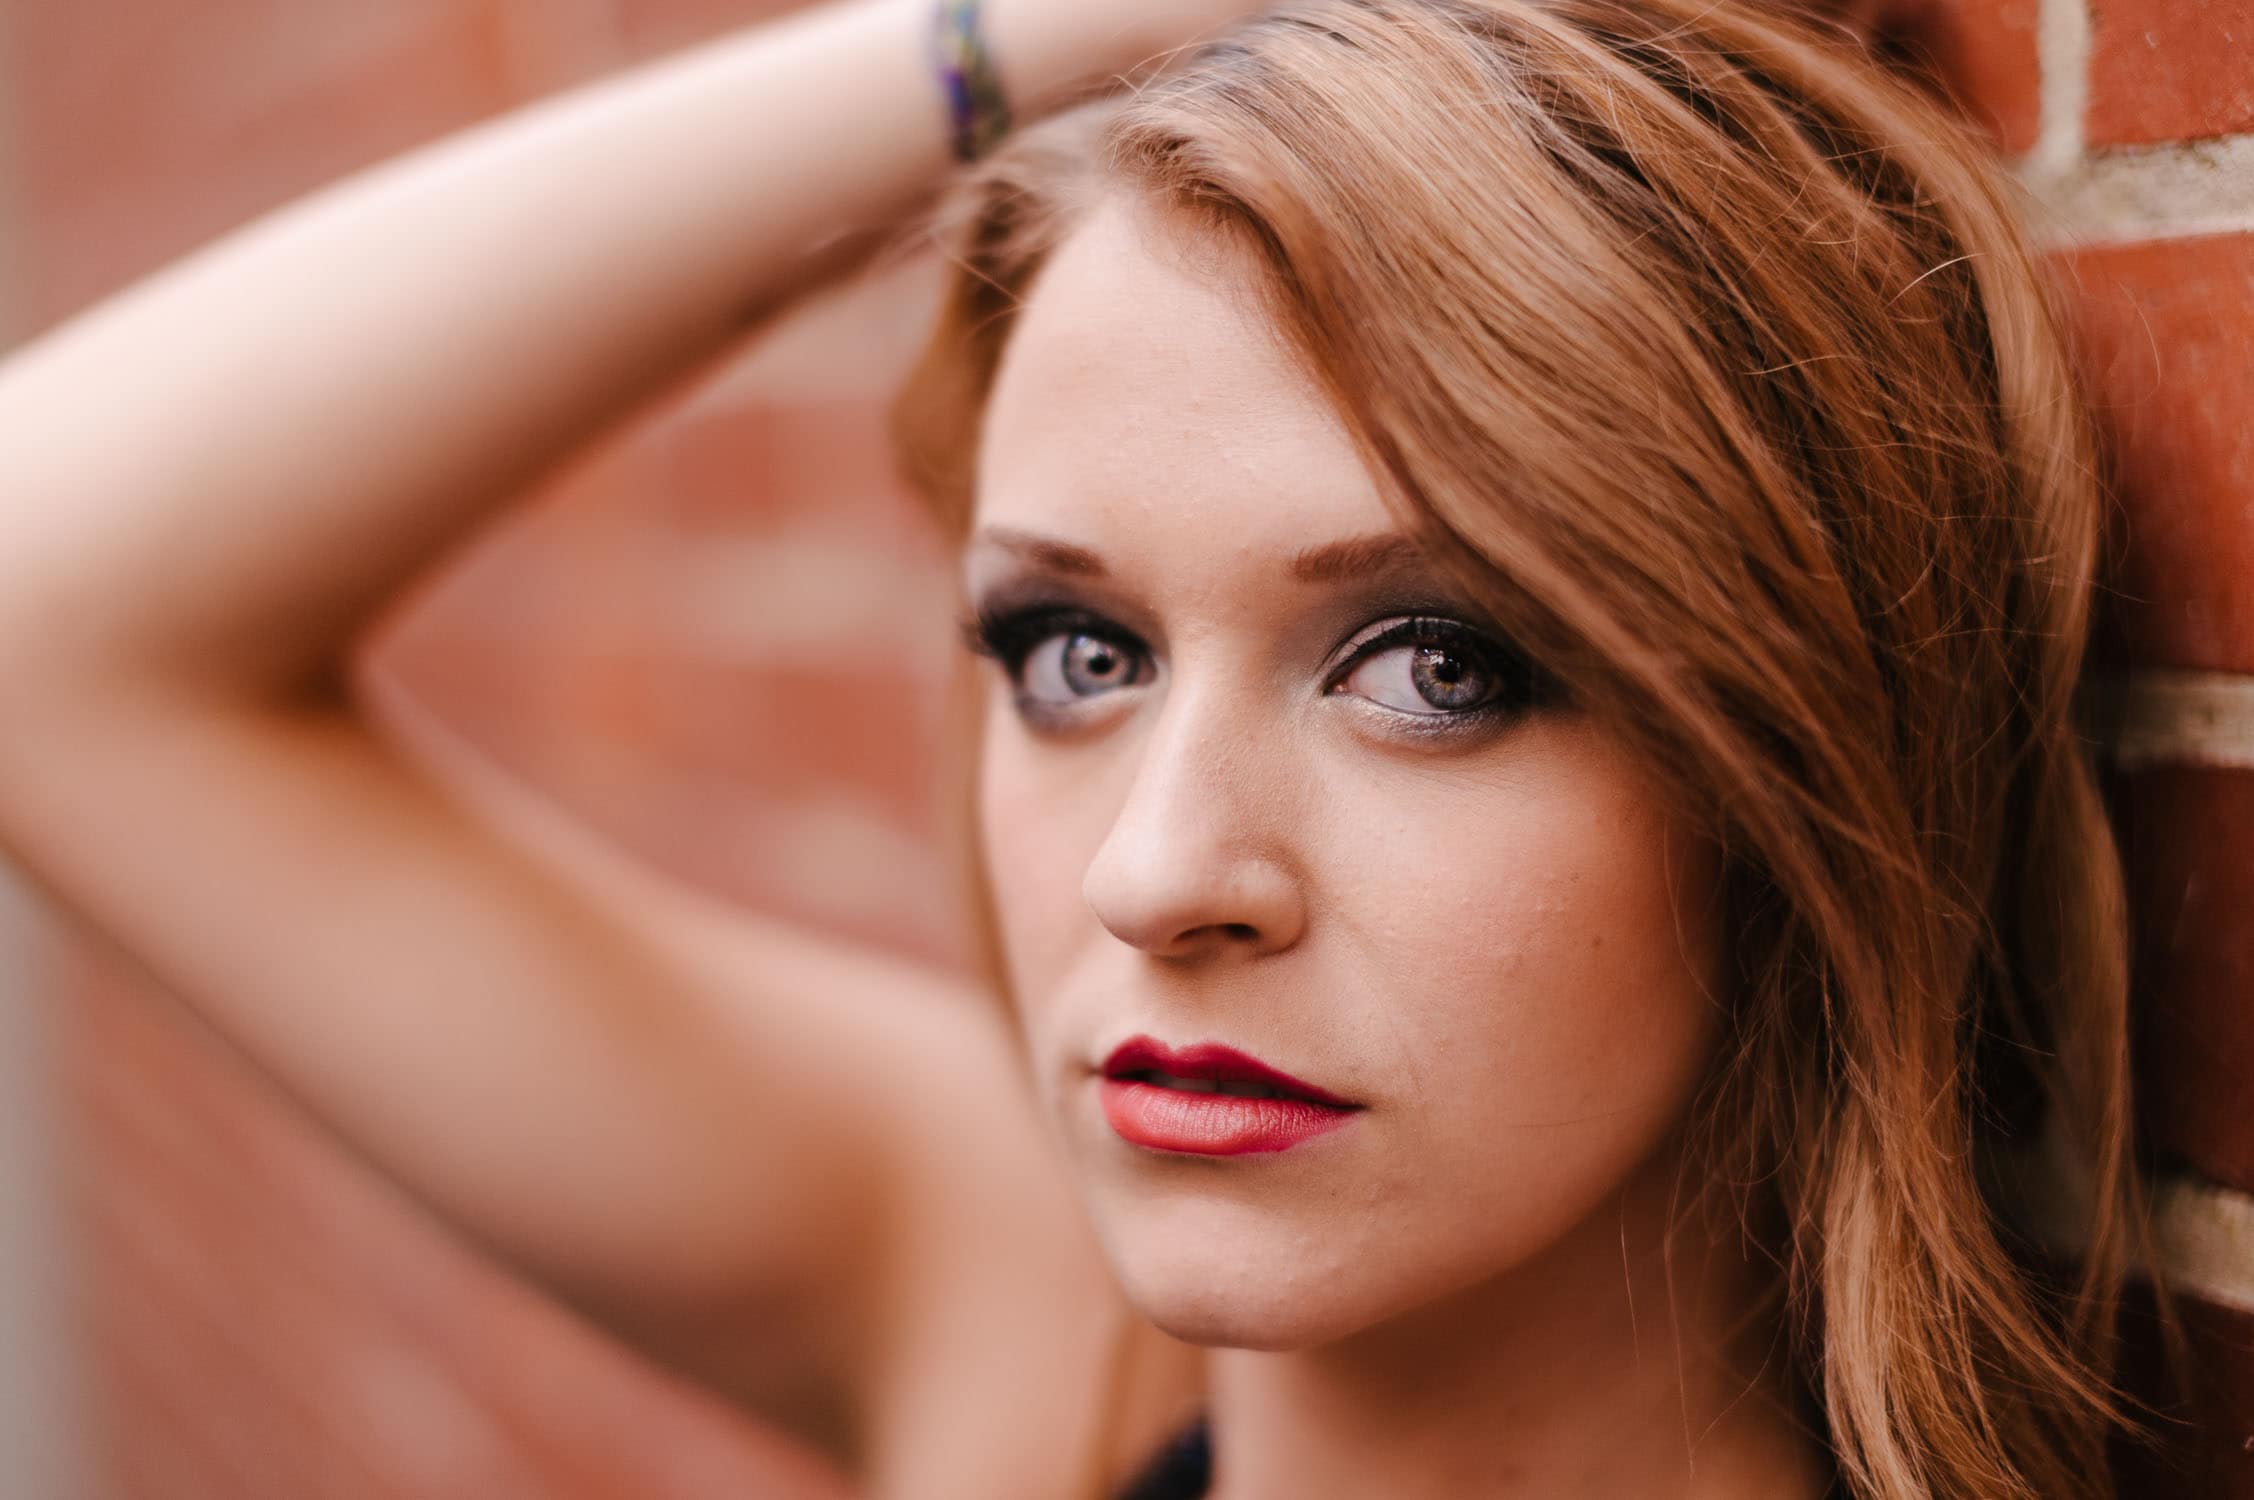 Portrait photography in Melbourne with red headed model